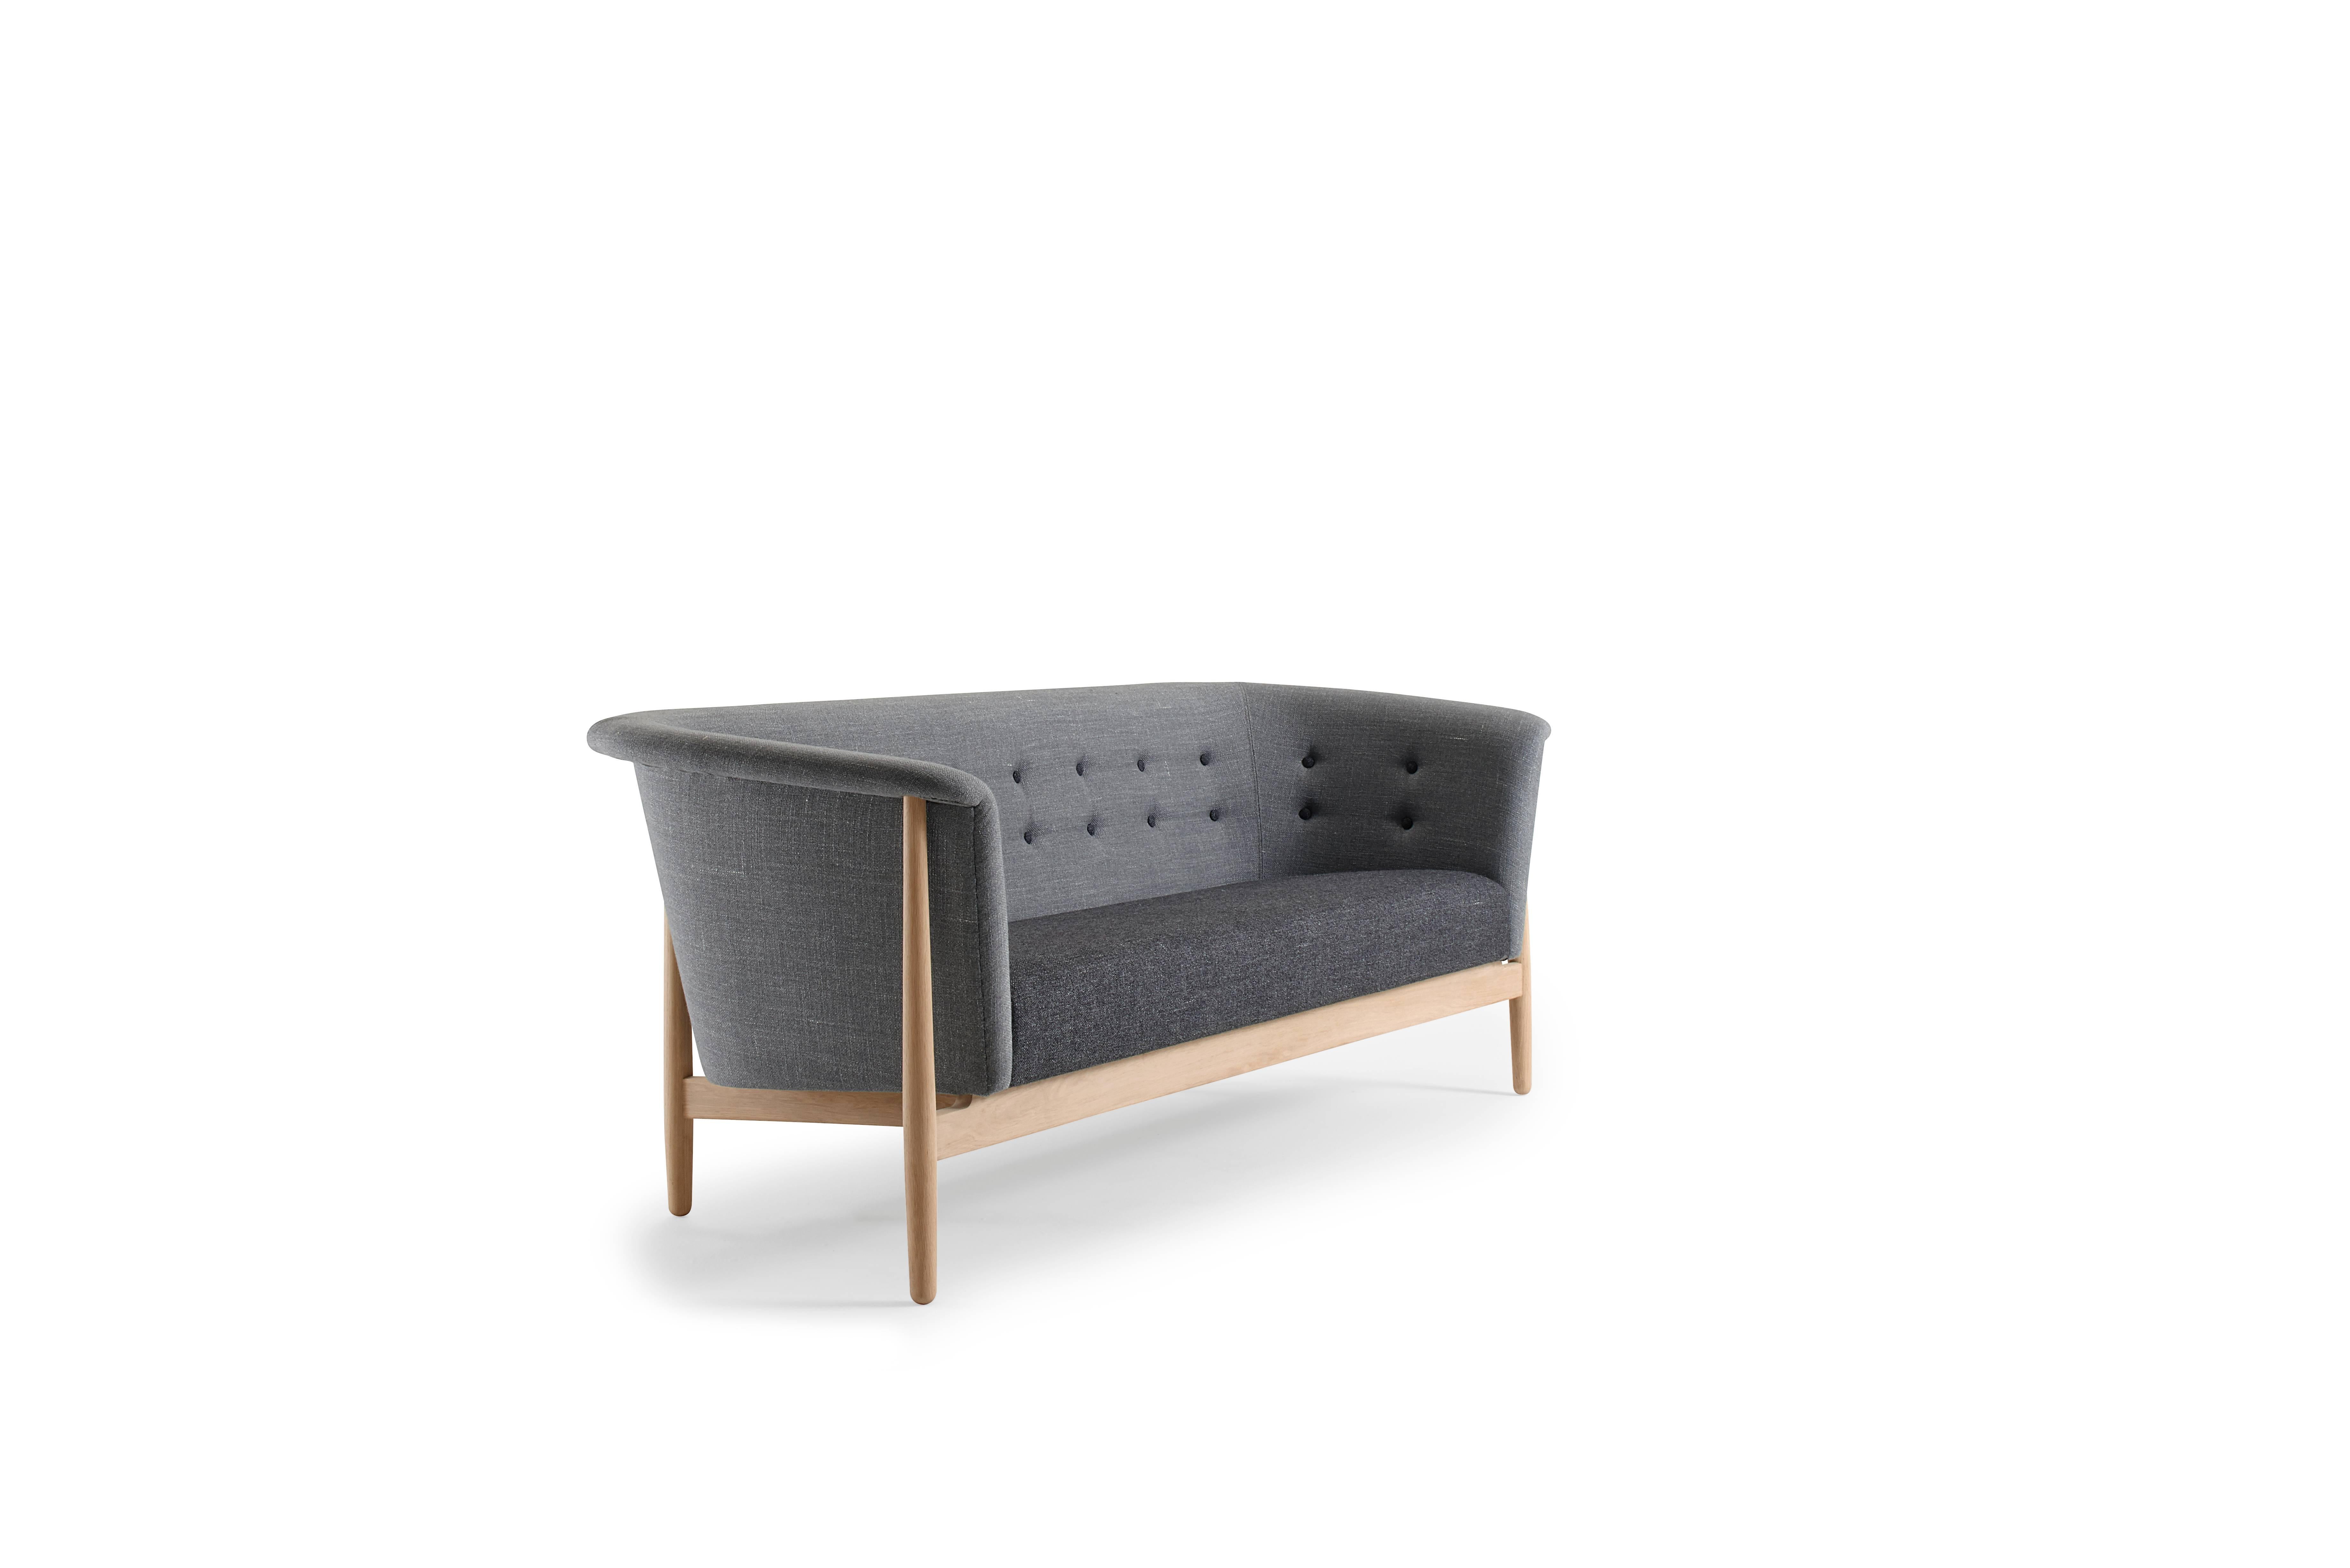 Nanna Ditzel (1923-2005). Vita couch in oak, upholstered in two shades of grey fabric from Svensson with grey buttons. Designed in 1958. Manufactured by GETAMA in Denmark. It is possible to choose any color and type of fabric for the couch. Seat